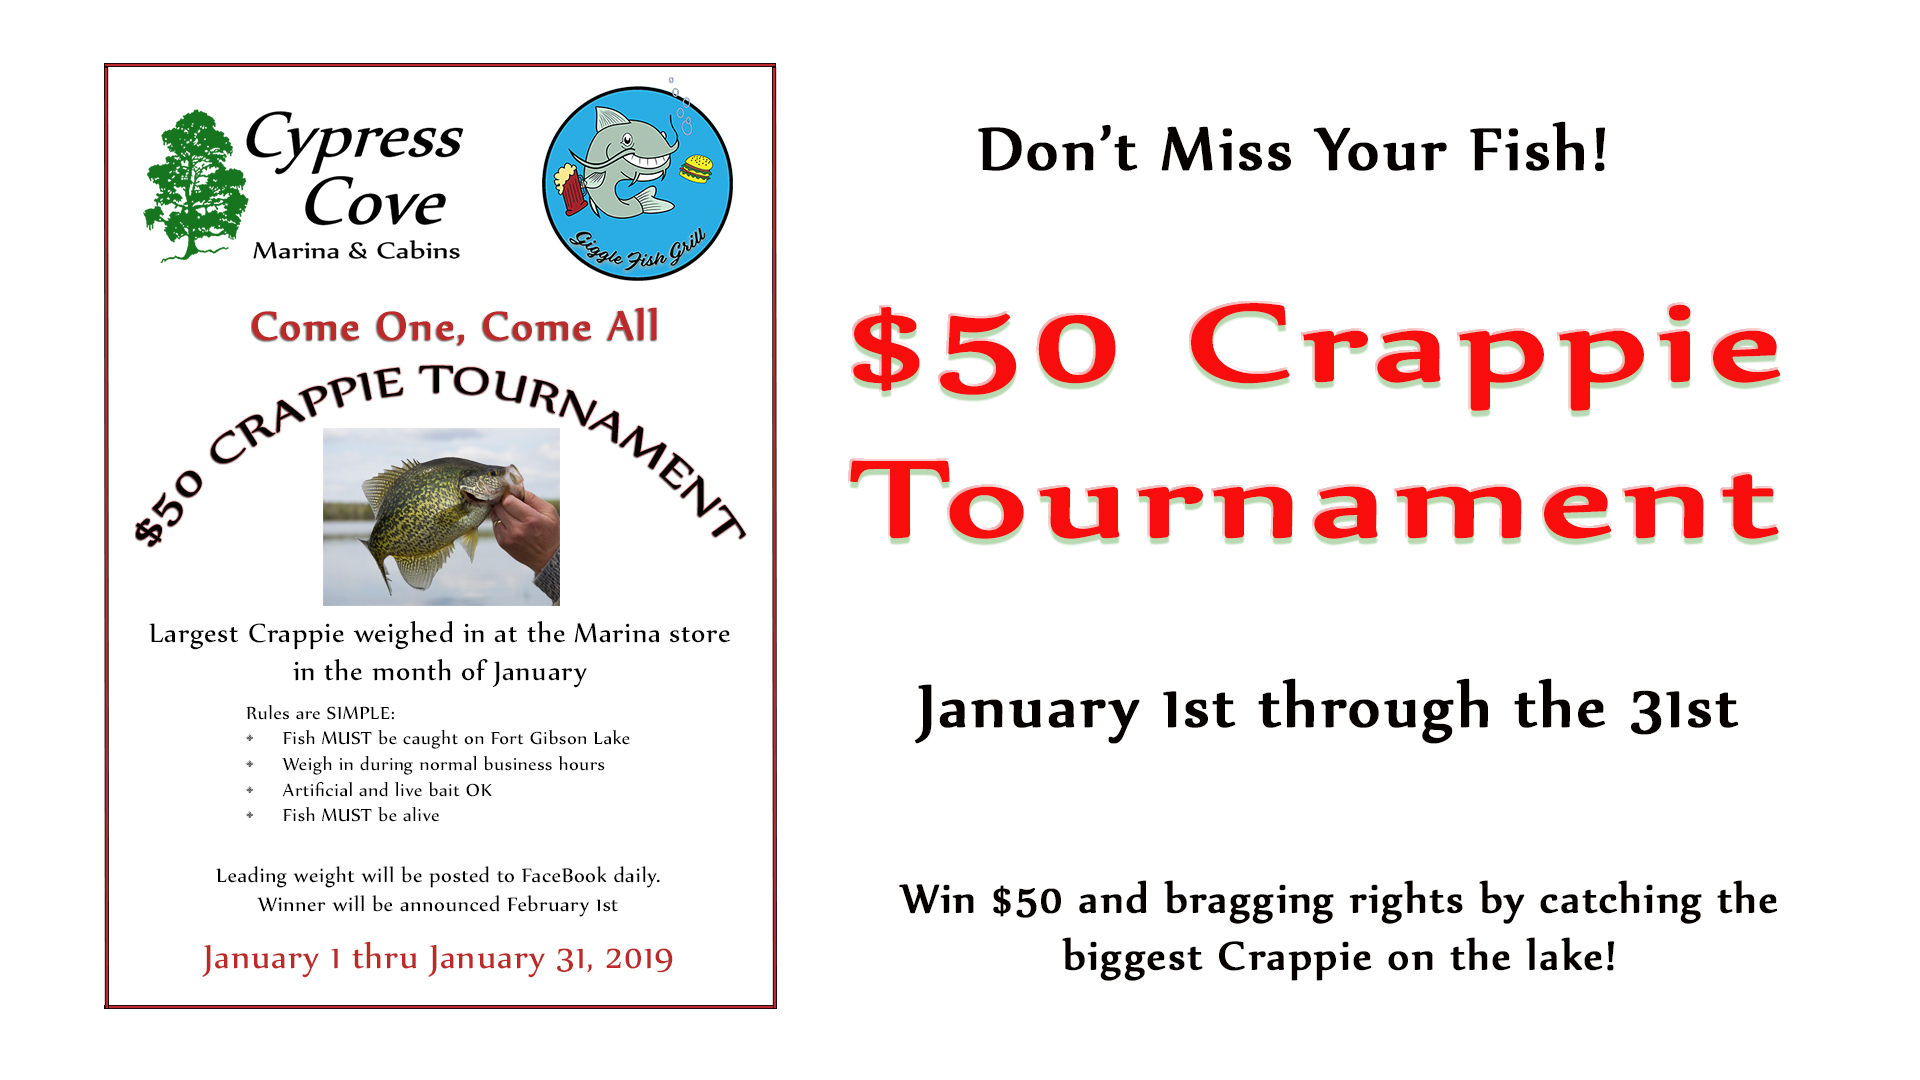 $50 Crappie Tournament from January 1st till the 31st!